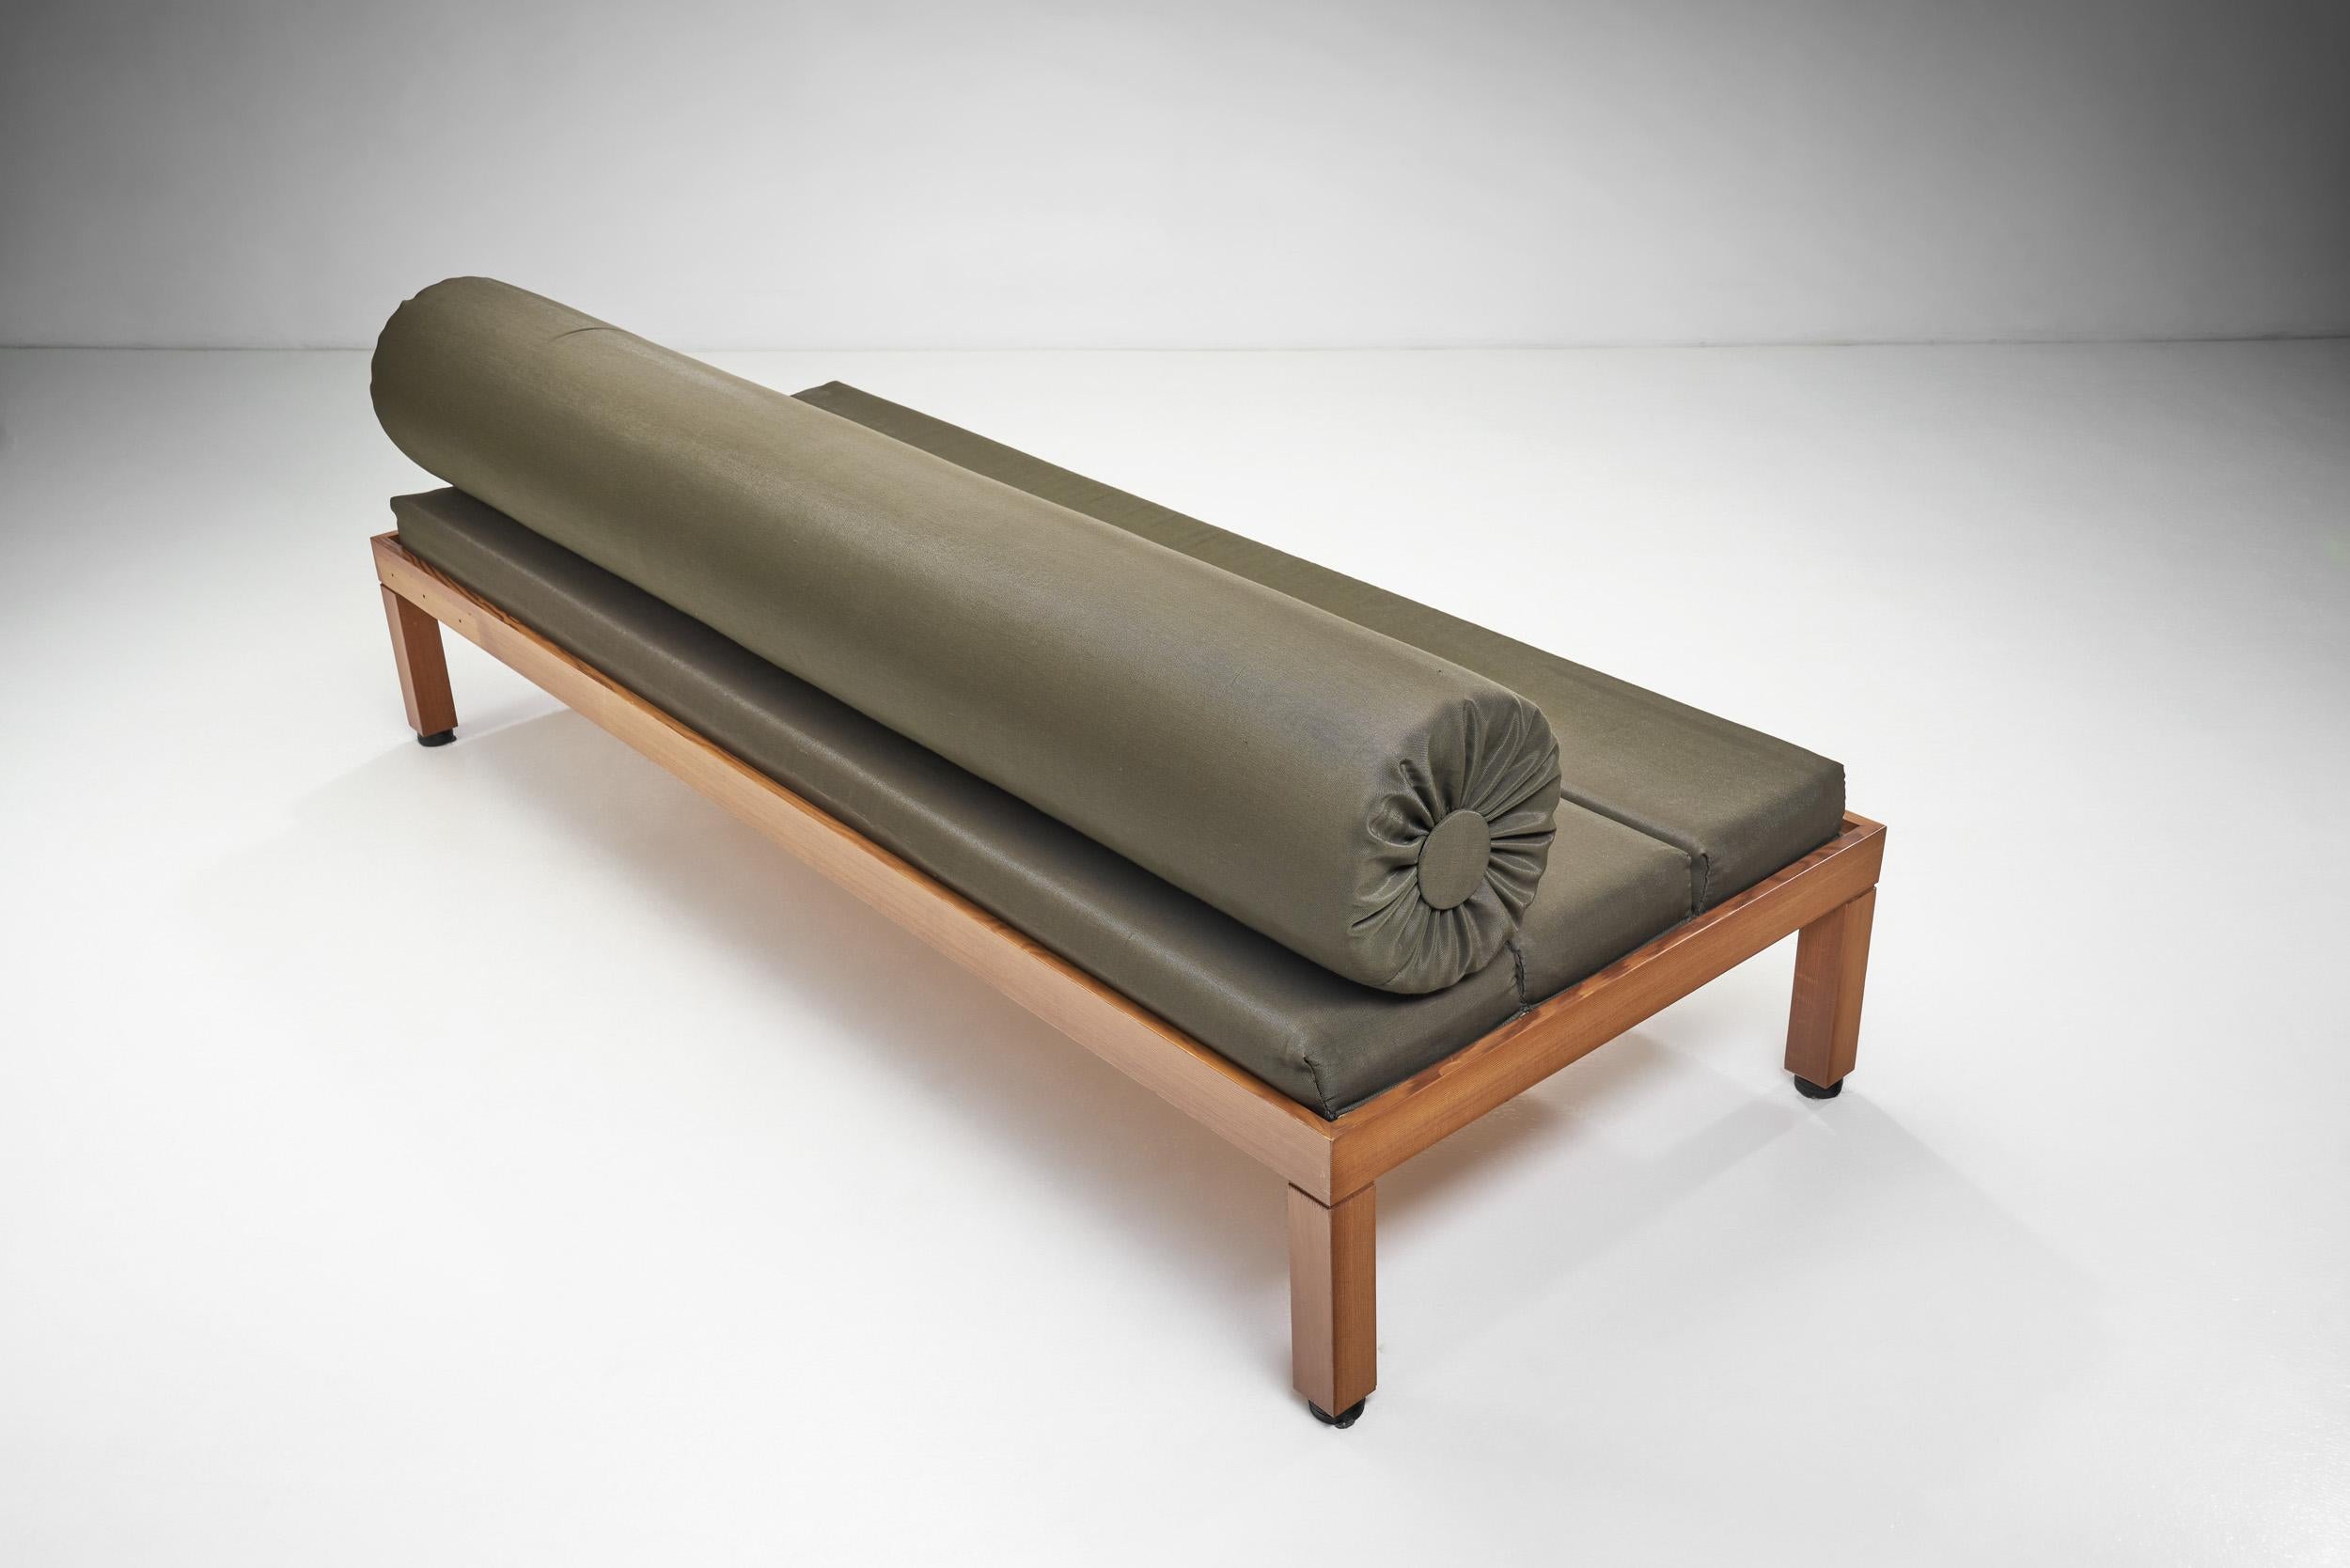 A Haroma, Saarinen, and Salo Design Collaboration Daybed, Finland 1960 For Sale 5